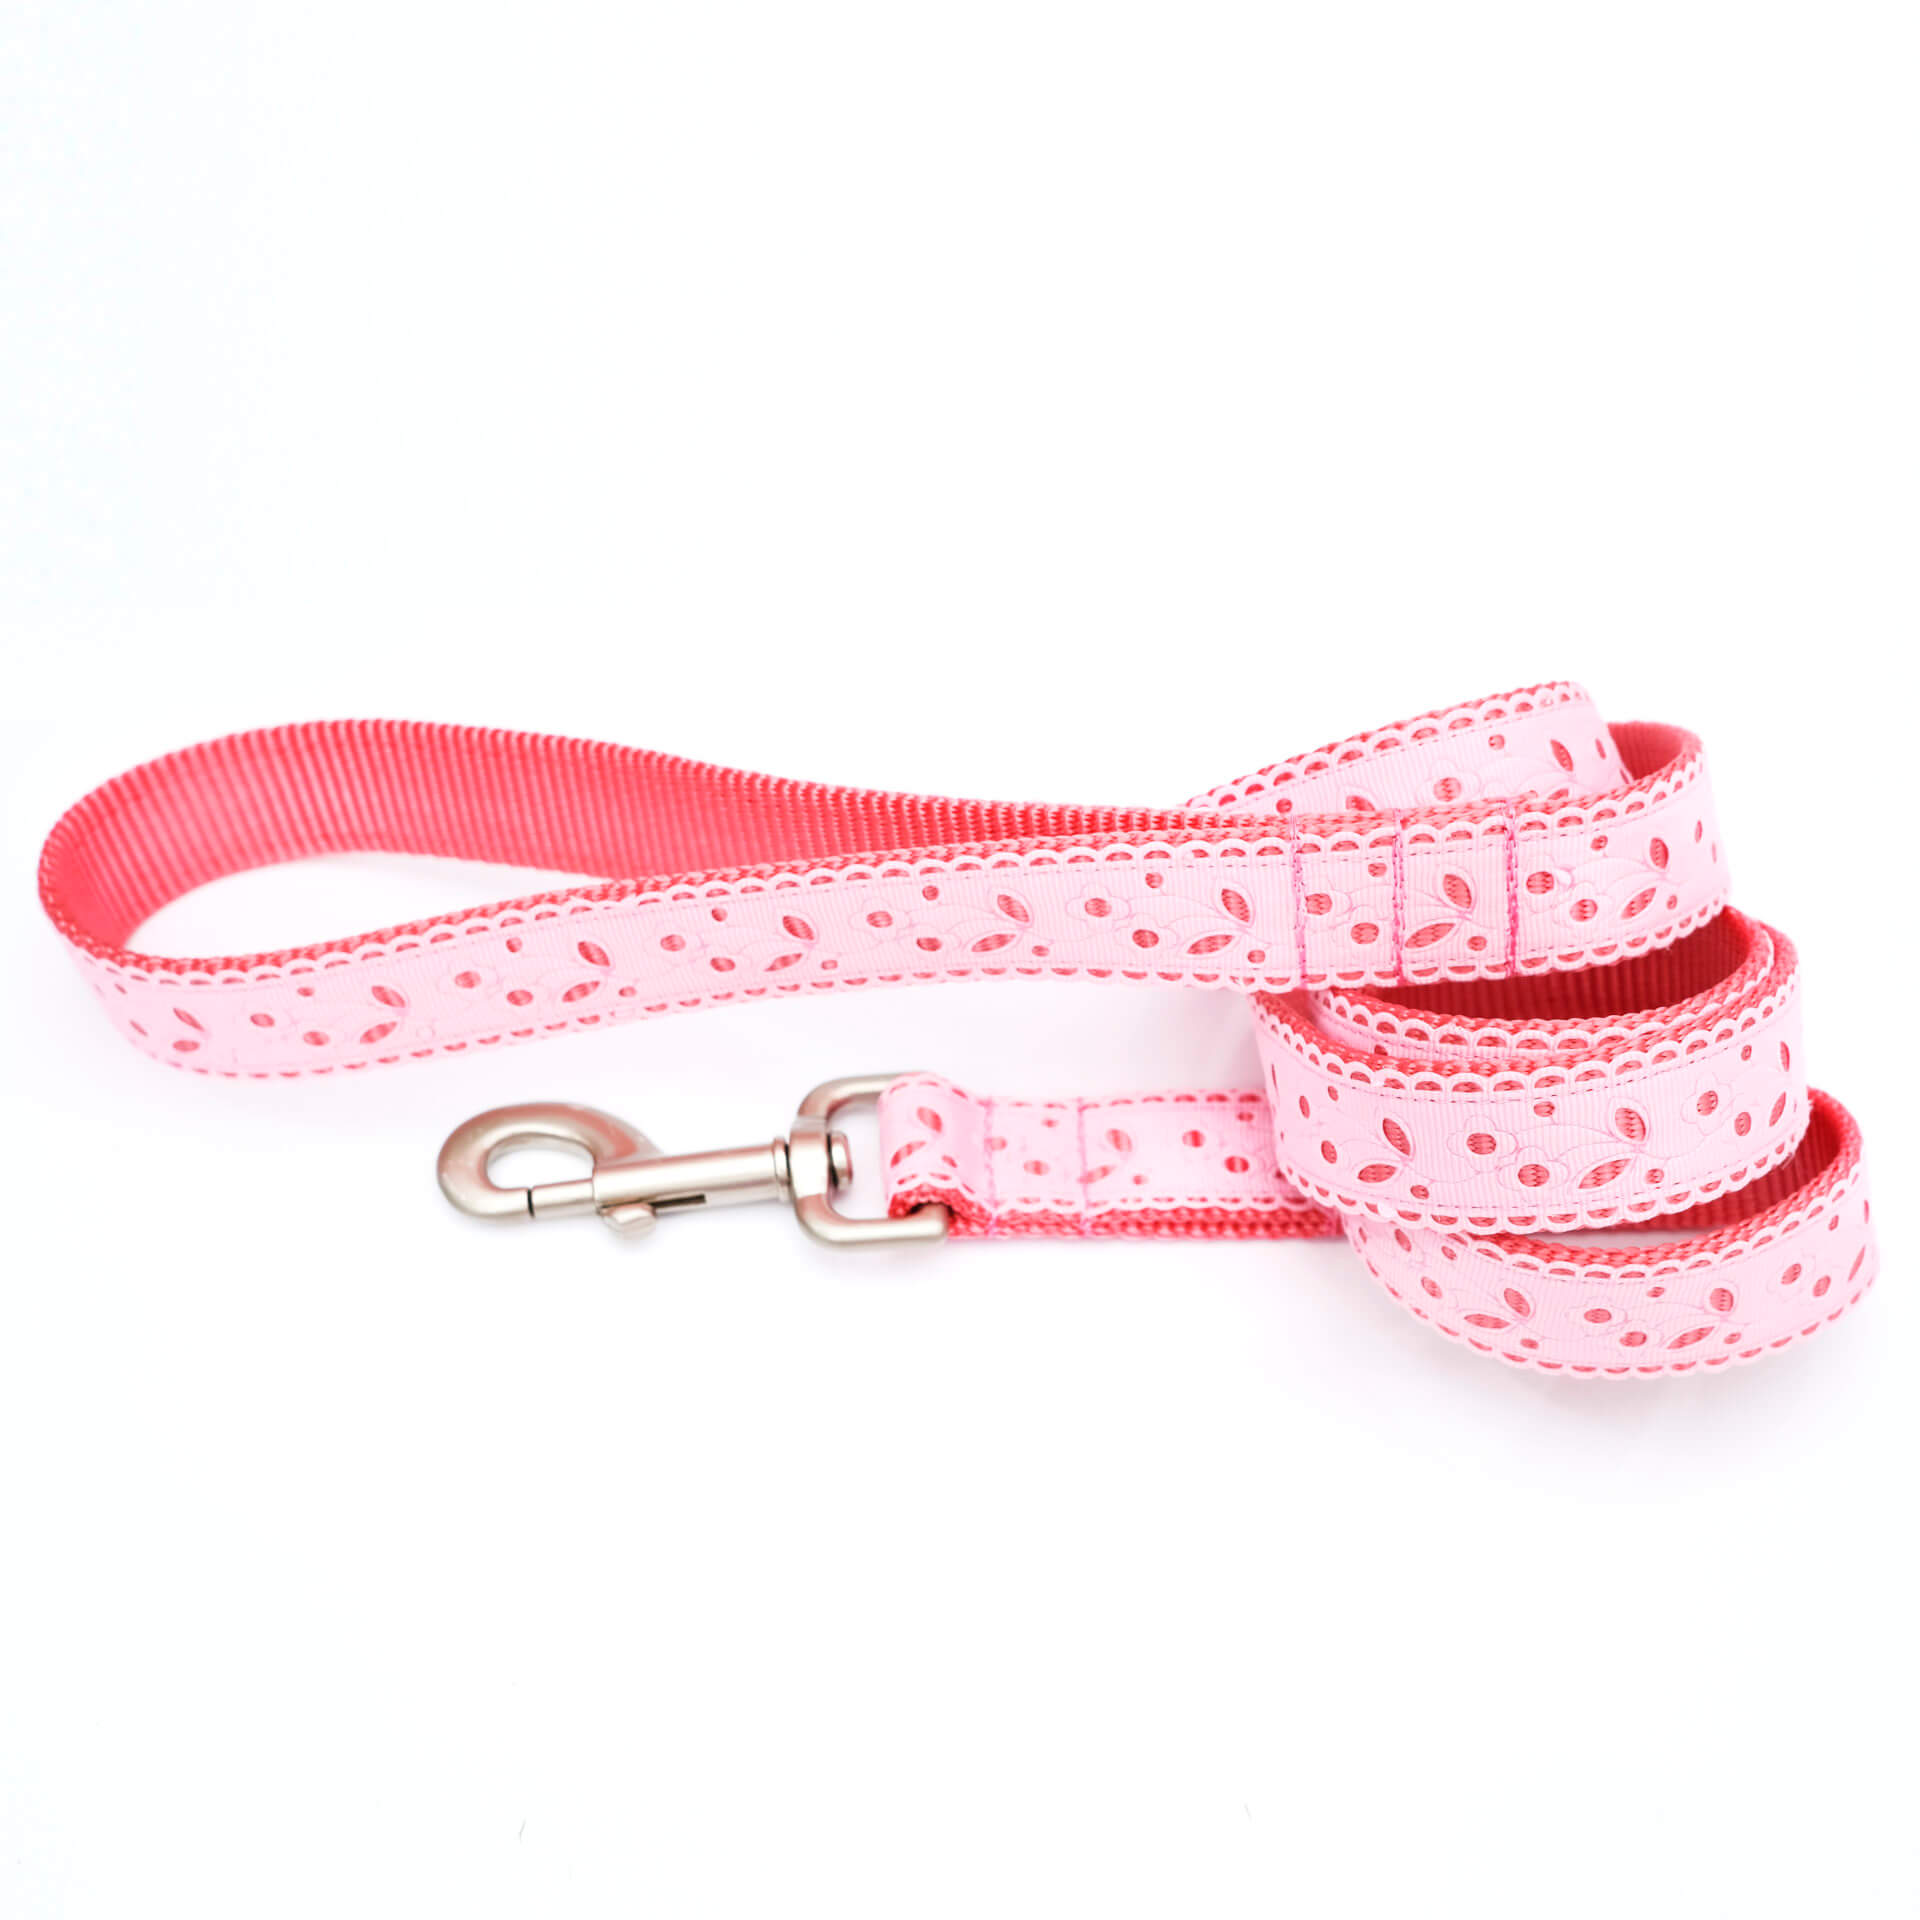 Eve Lace Valentine's Dog Collar - 1.5 Inch Wide for Large Dogs + Greyhounds  Eve Lace Valentine's Dog Collar - 1.5 Inch Wide for Large Dogs + Greyhounds